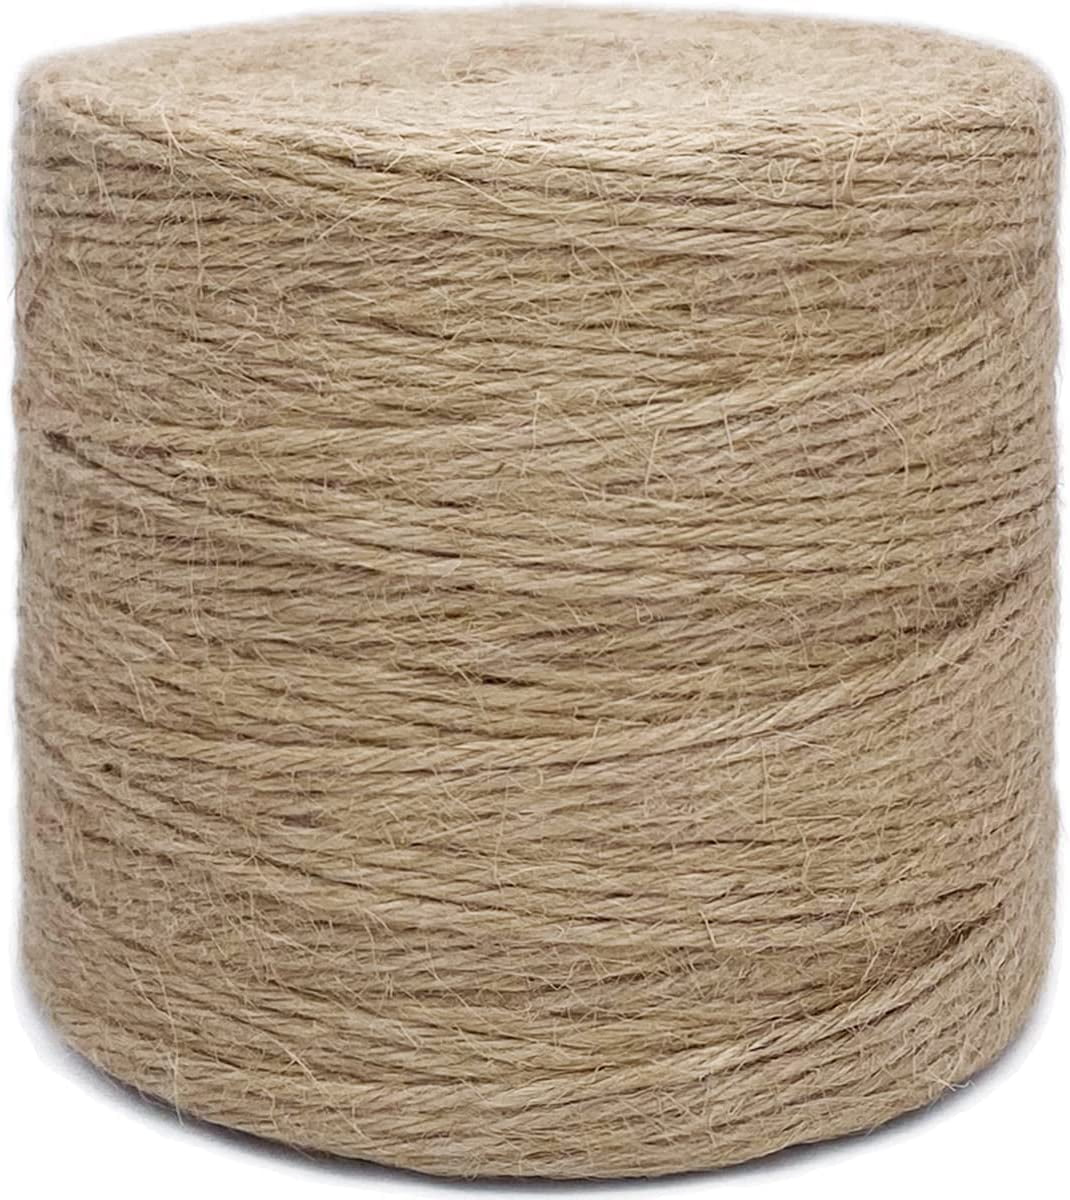 1000FT Jute Twine Rope 3mm 6ply Natural Thick Garden Twine String Heavy  Duty for Gardening Bundling Crafts Arts Gift Brown Jute-03-1000  Jute-03-1000 